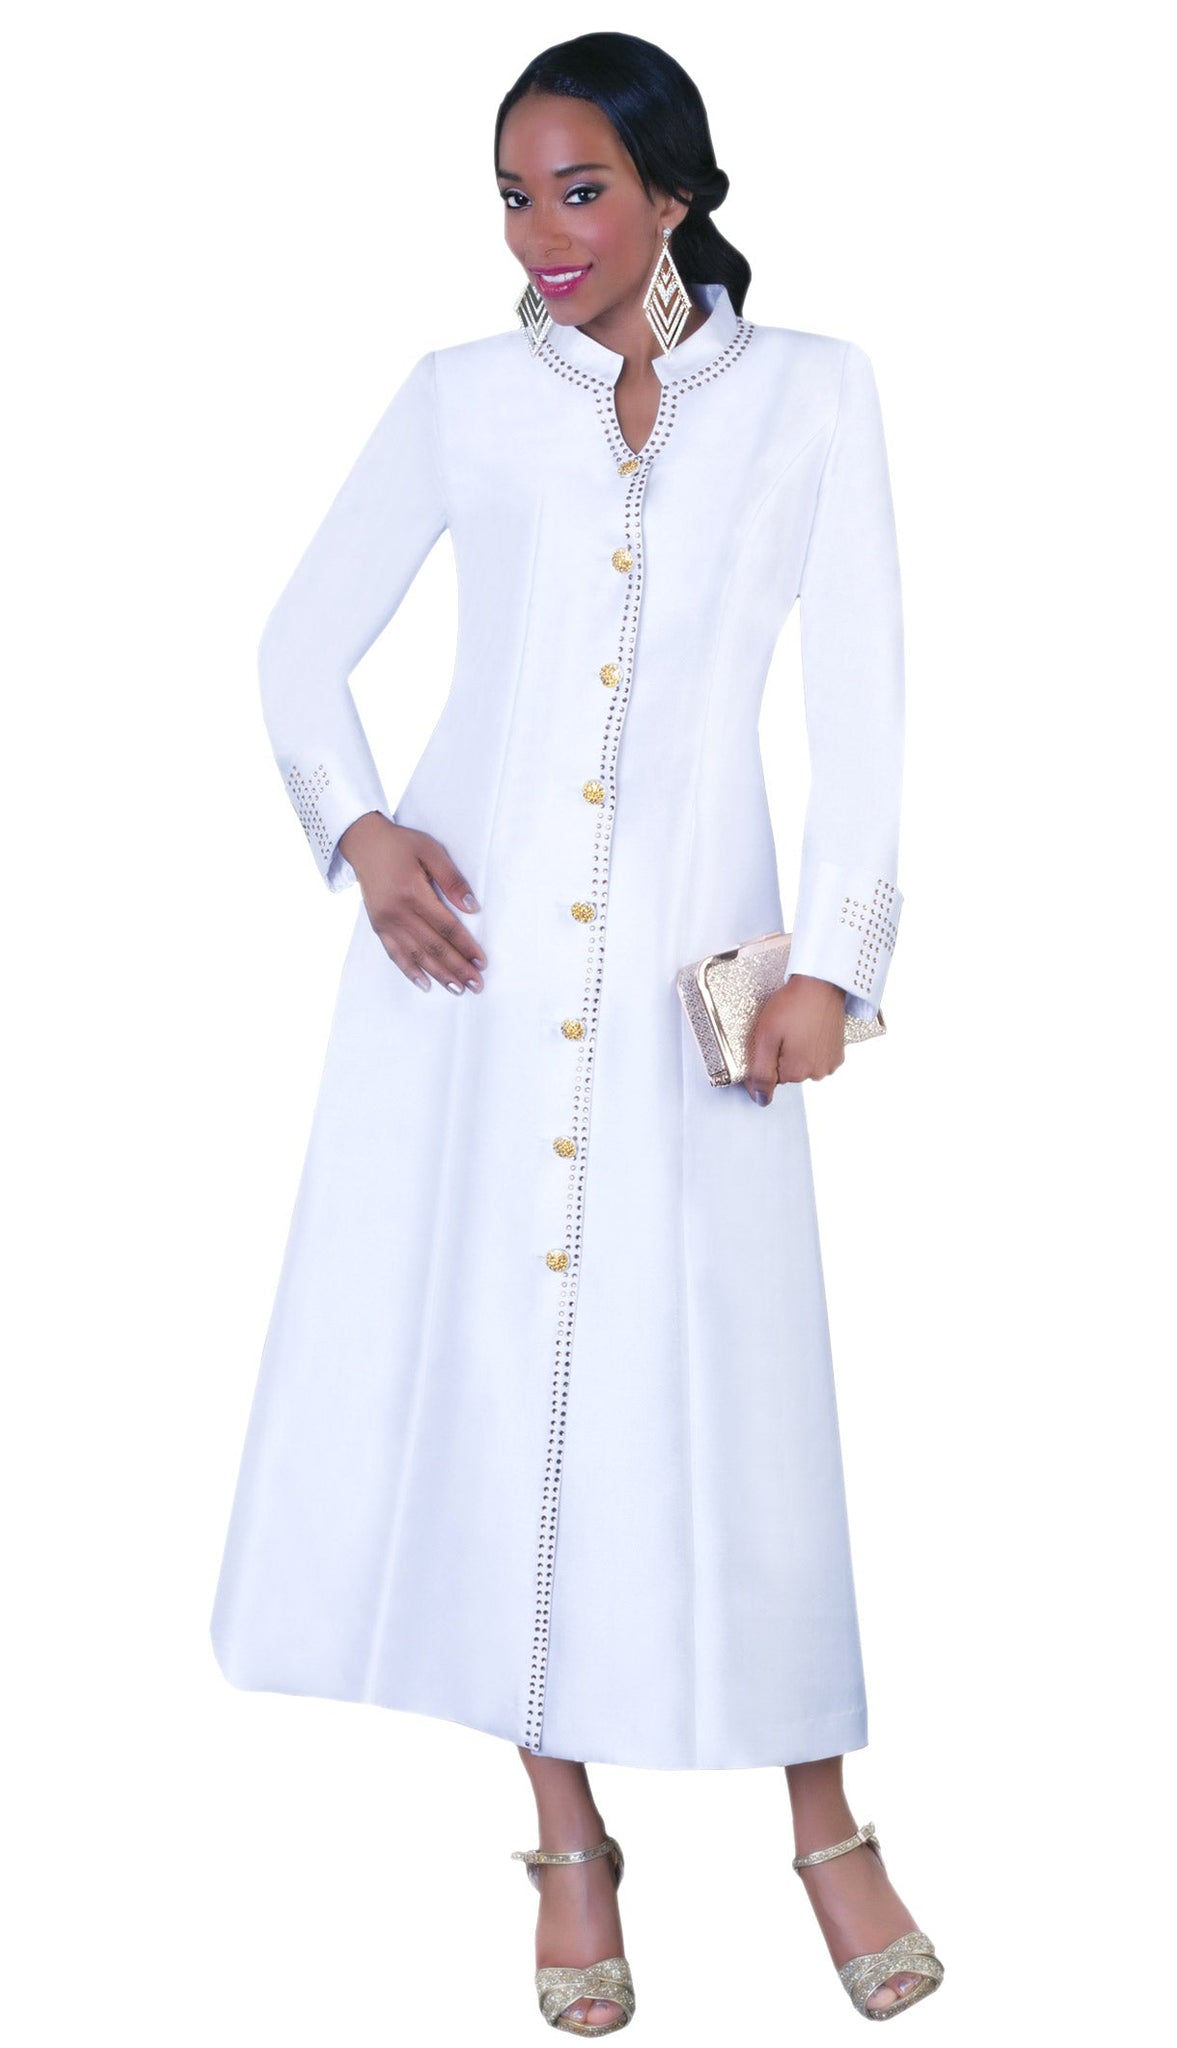 Tally Taylor Church Robe 4445-White | Church suits for less